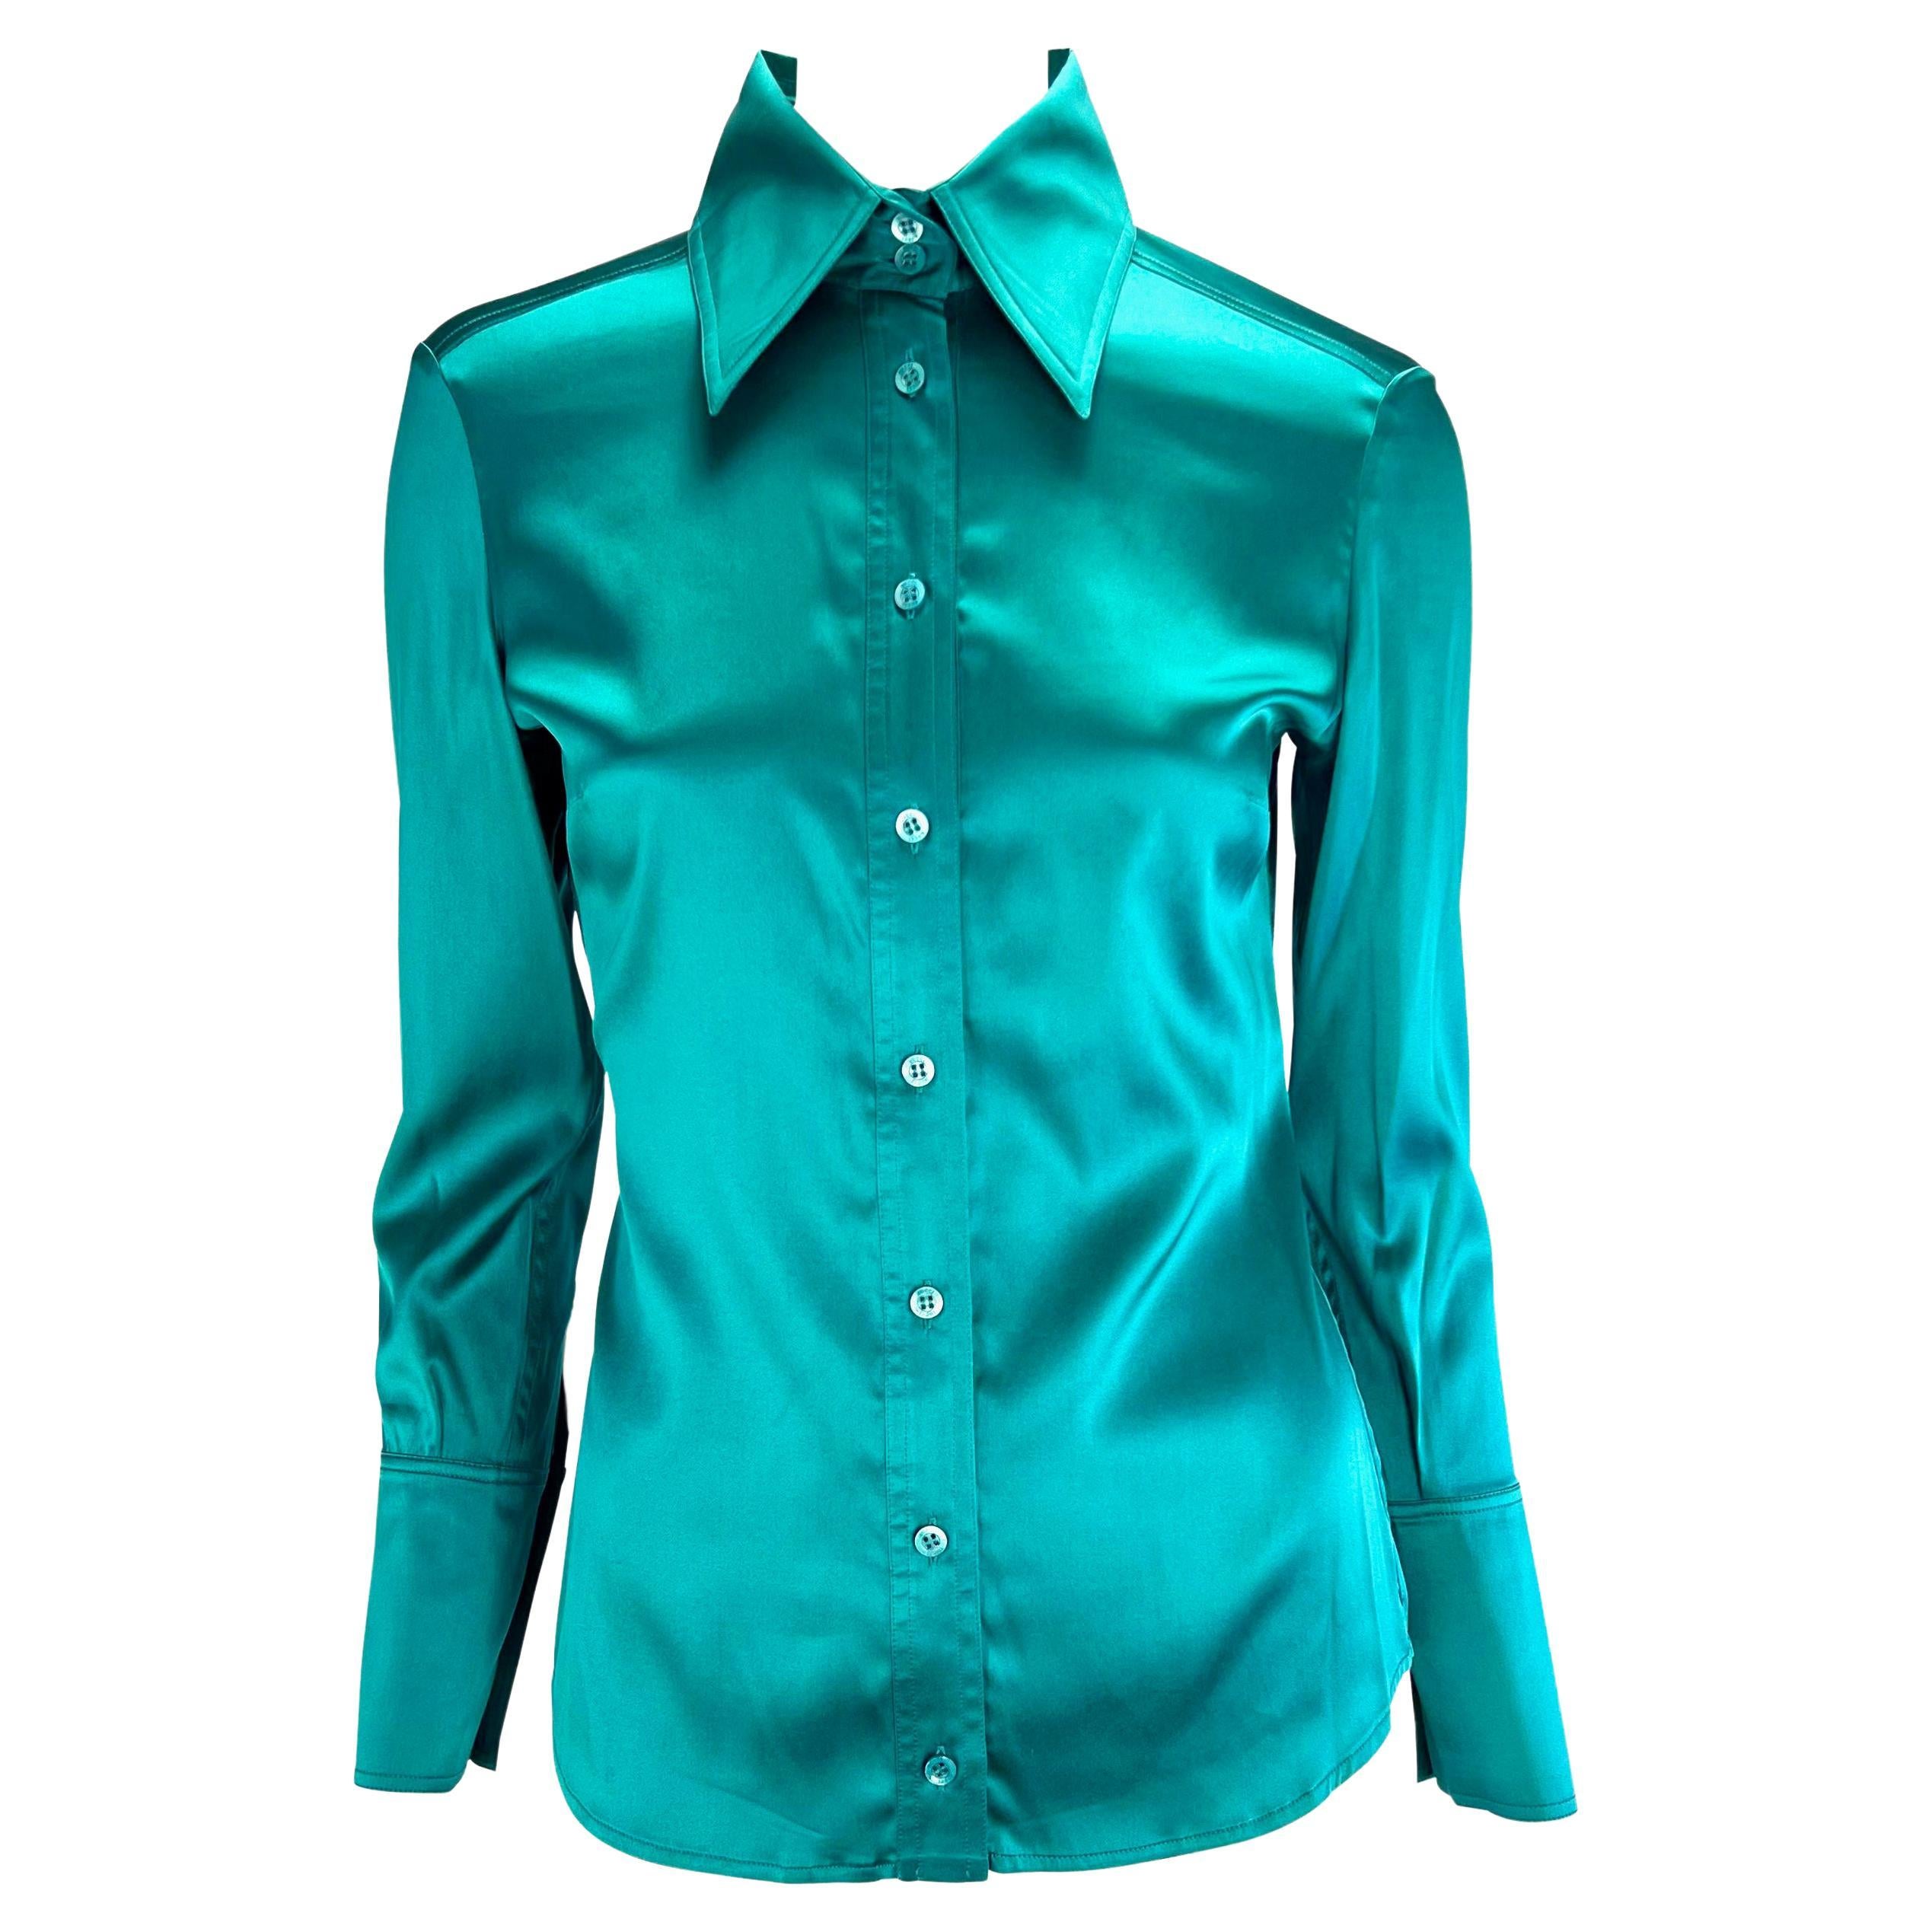 Presenting a collared button up teal silk Gucci top, designed by Tom Ford. The oversized collar and cuffs give the visual illusion of a more petite frame. Words and pictures cannot depict how amazing the fabric on this shirt is in person.